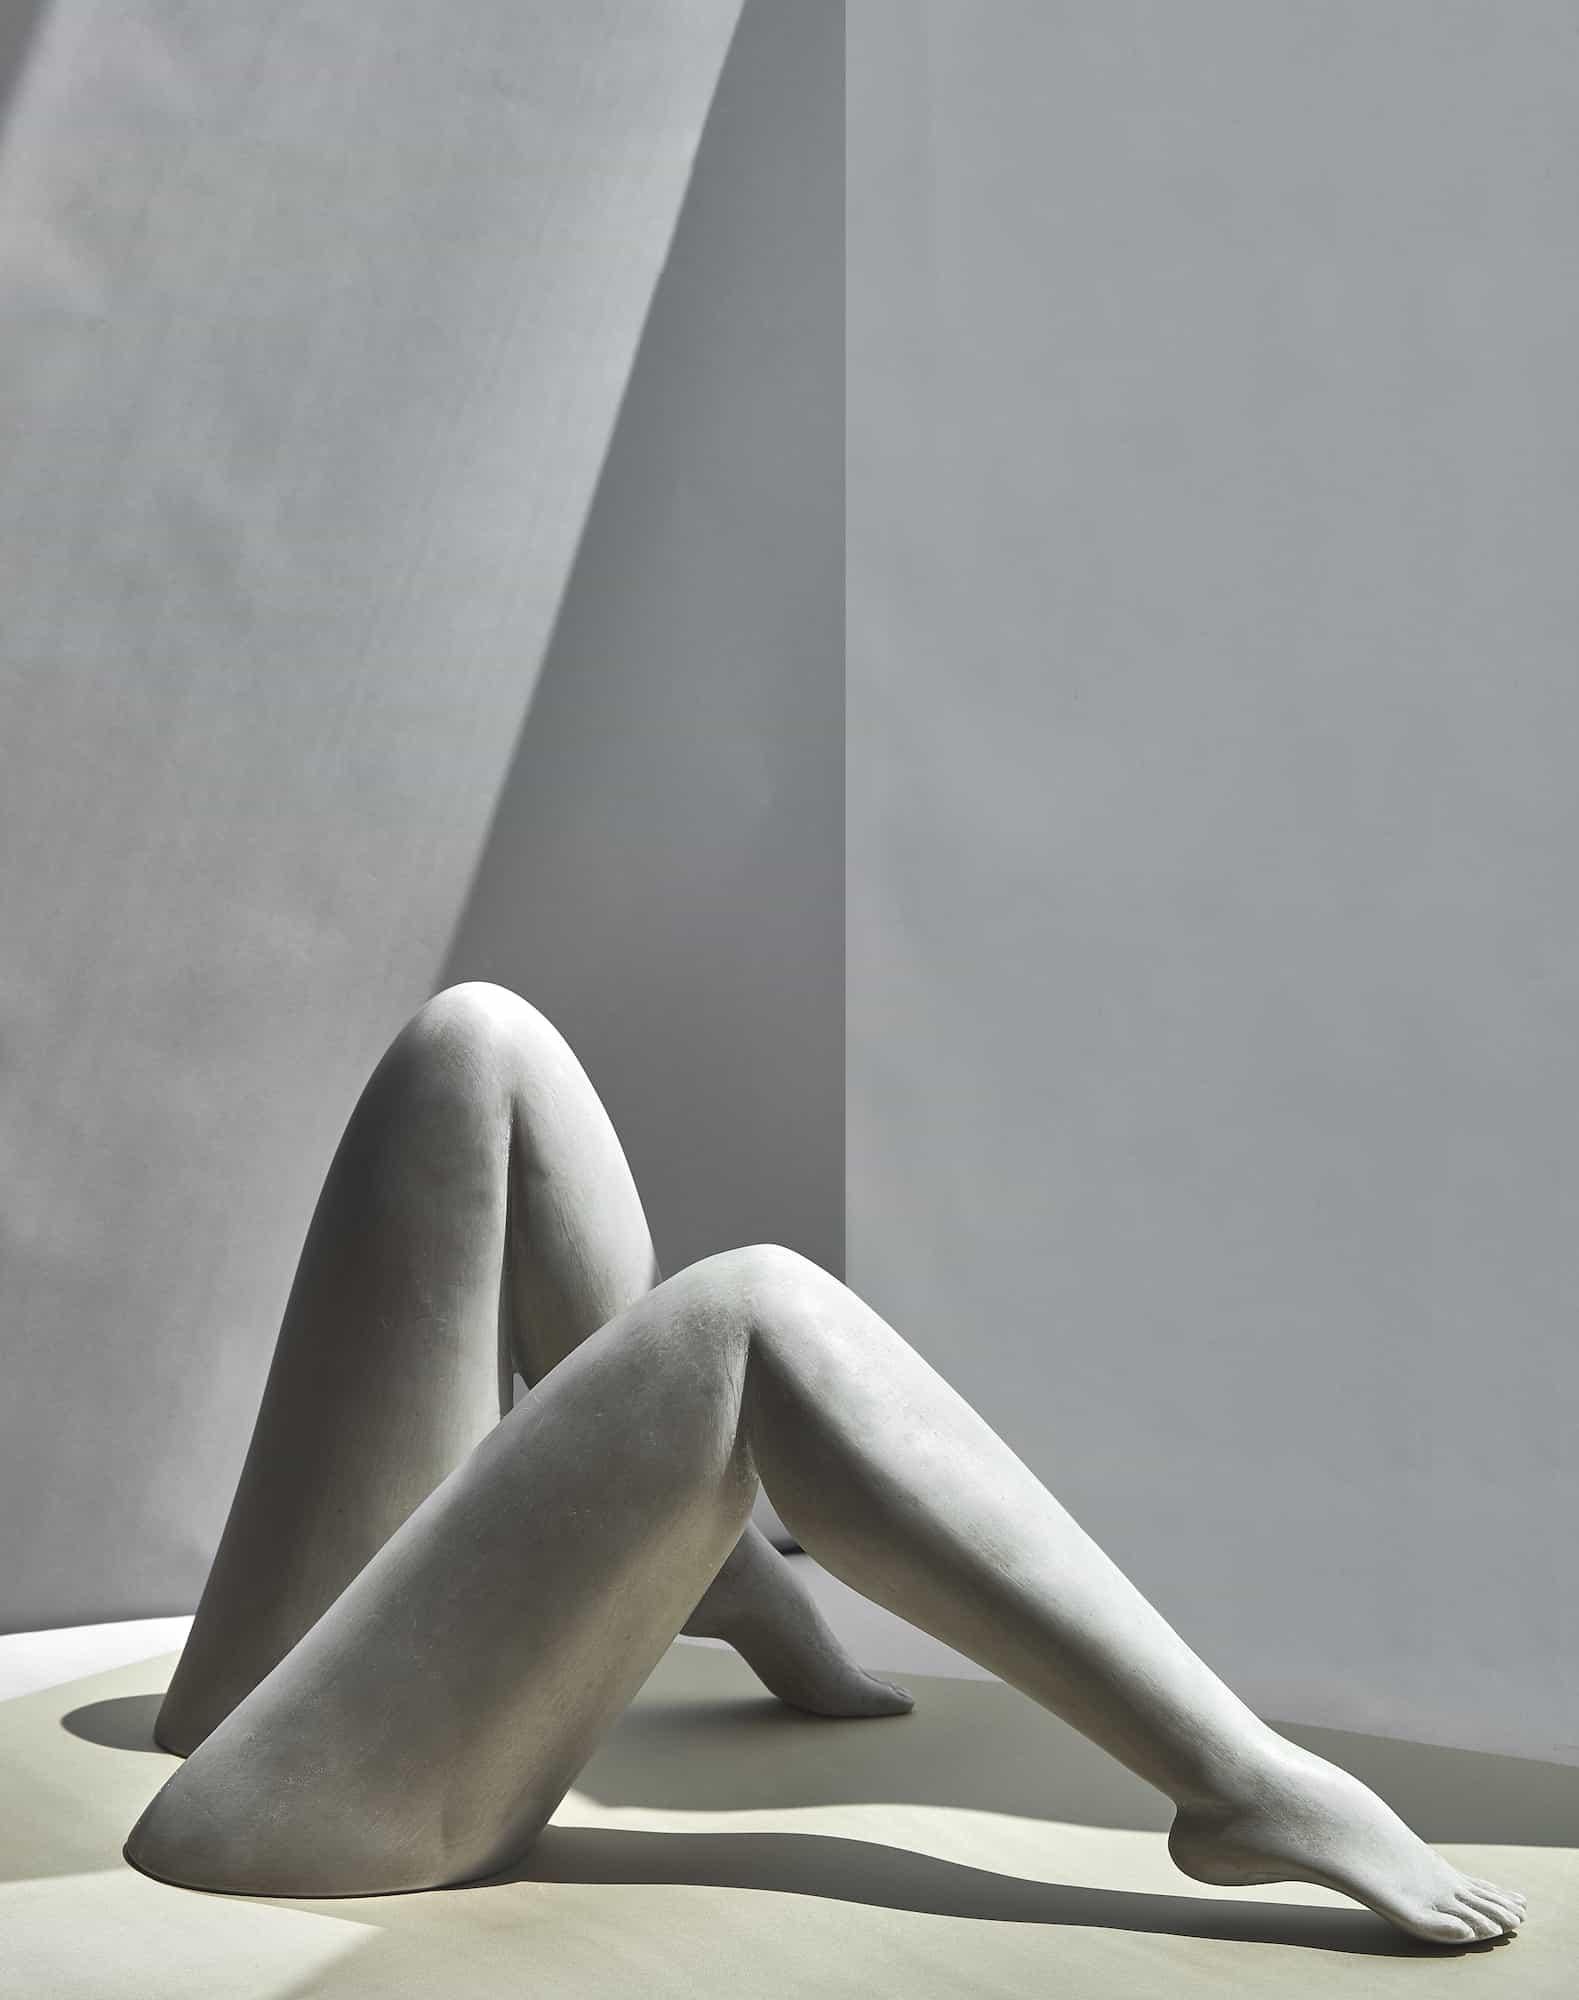 Small Le Gambe sculpture by Marcela Cure
Dimensions: Leg 1 W 35 x D 5 x H 16 cm / Leg 2 W 21 x D 6 x H 21 cm
Materials: Resin and Stone Composite

Our Le Gambe sculpture is composed of two individual legs which can be set in different ways